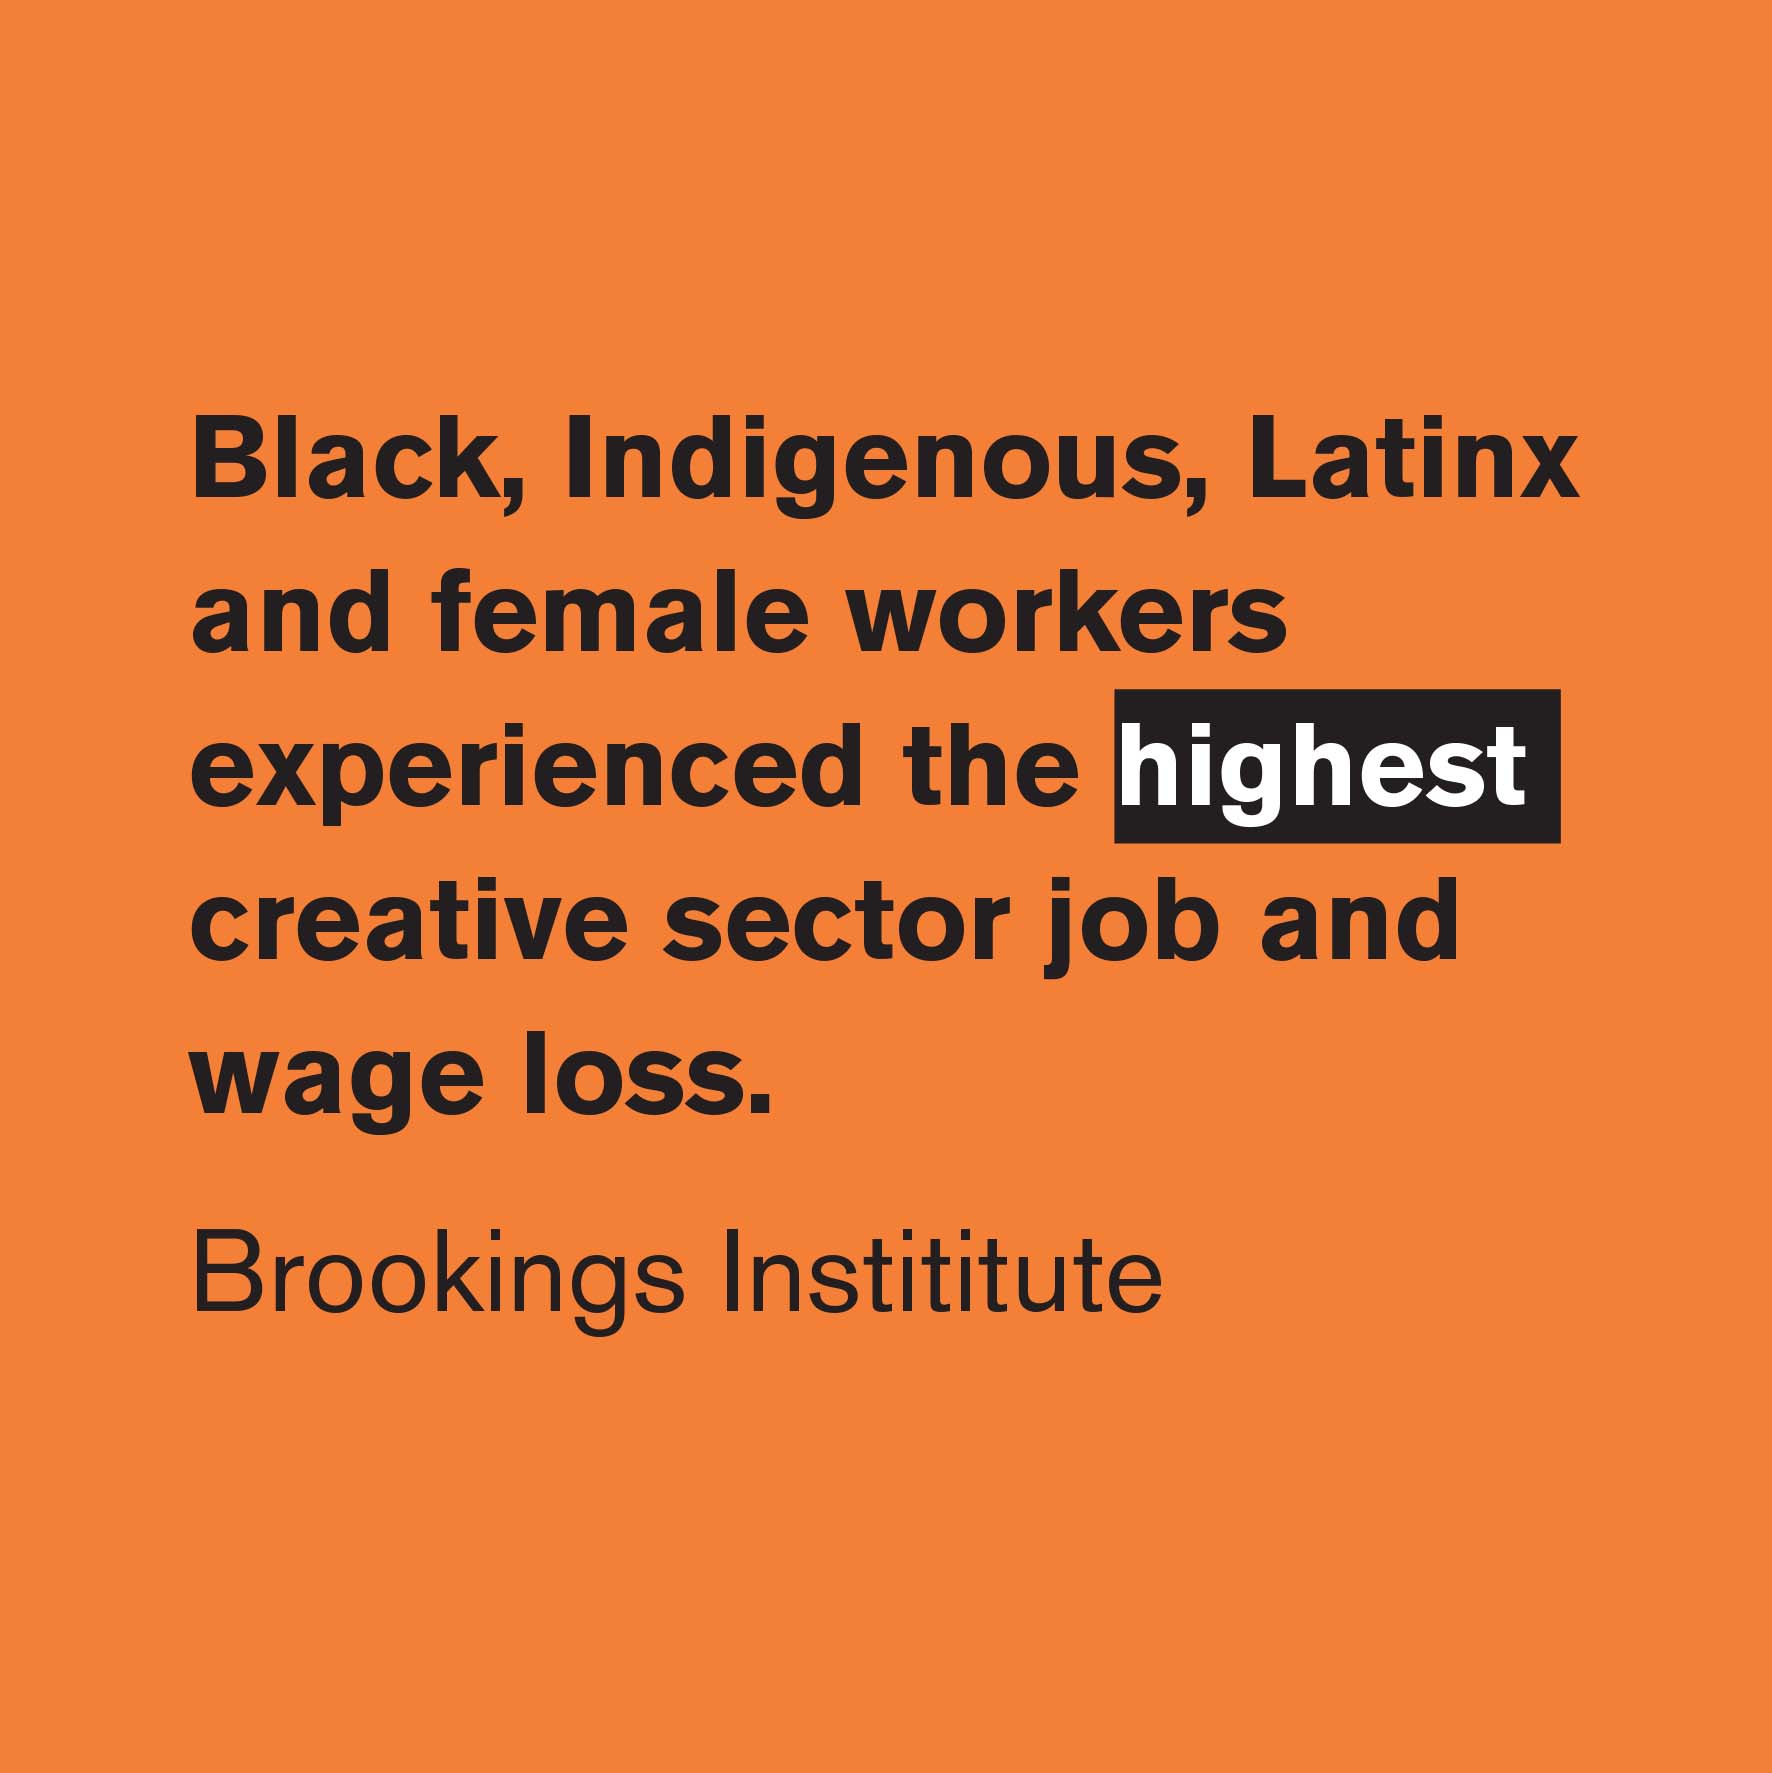 Black, Indigenous, Latinx and female workers experienced the highest creative sector job and wage loss (Brookings)